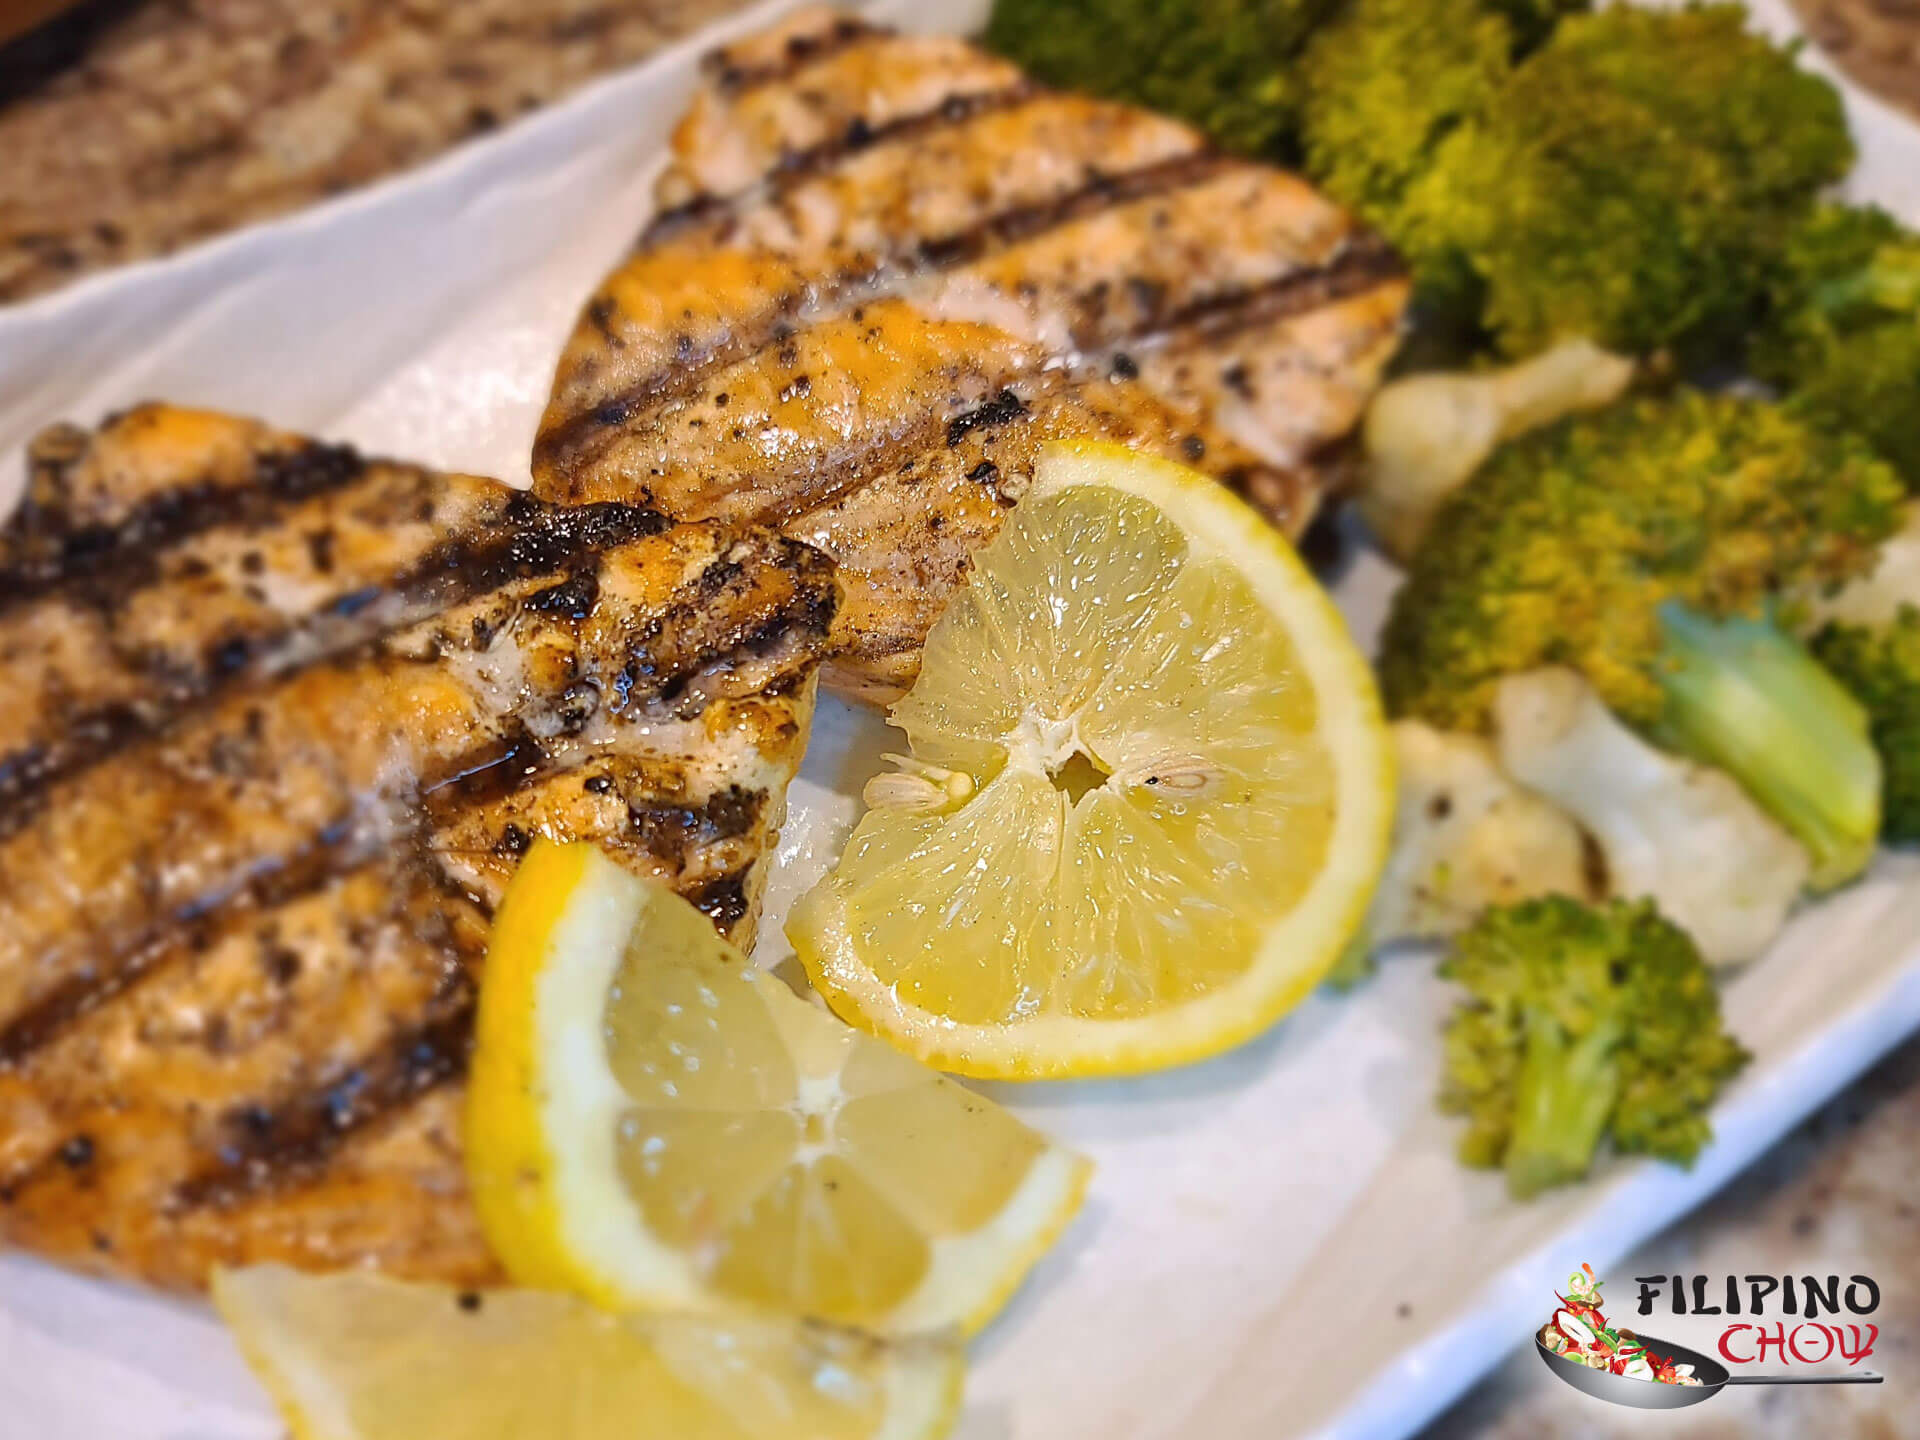 Wood Fire Grilled Salmon with Roasted Broccoli and Cauliflower